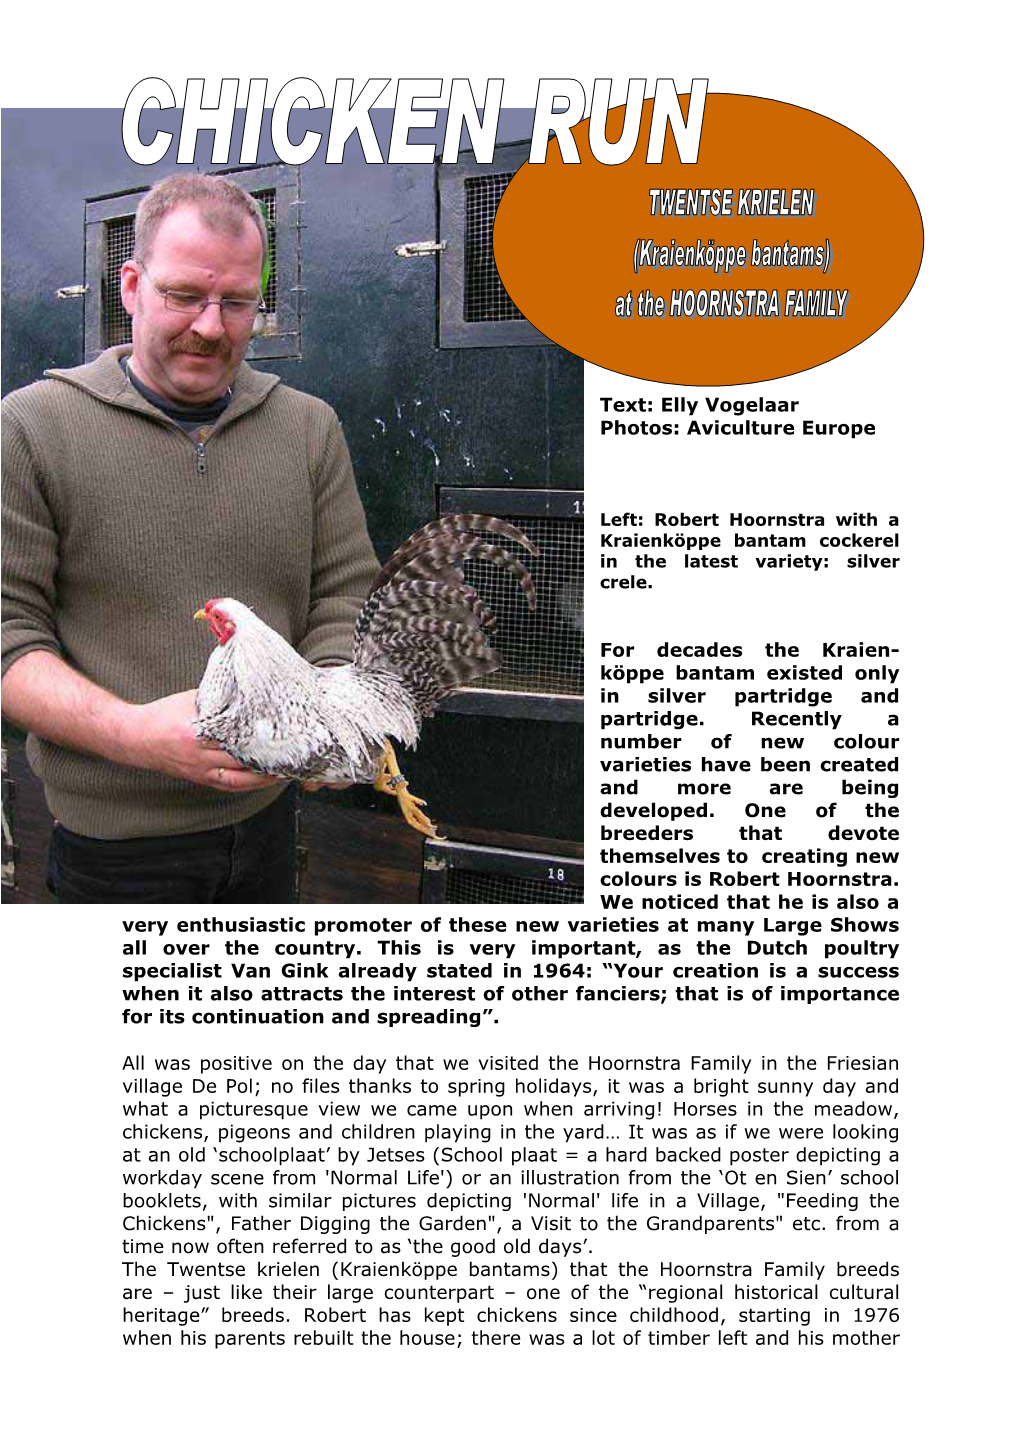 Text: Elly Vogelaar Photos: Aviculture Europe for Decades the Kraien- Köppe Bantam Existed Only in Silver Partridge and Partrid